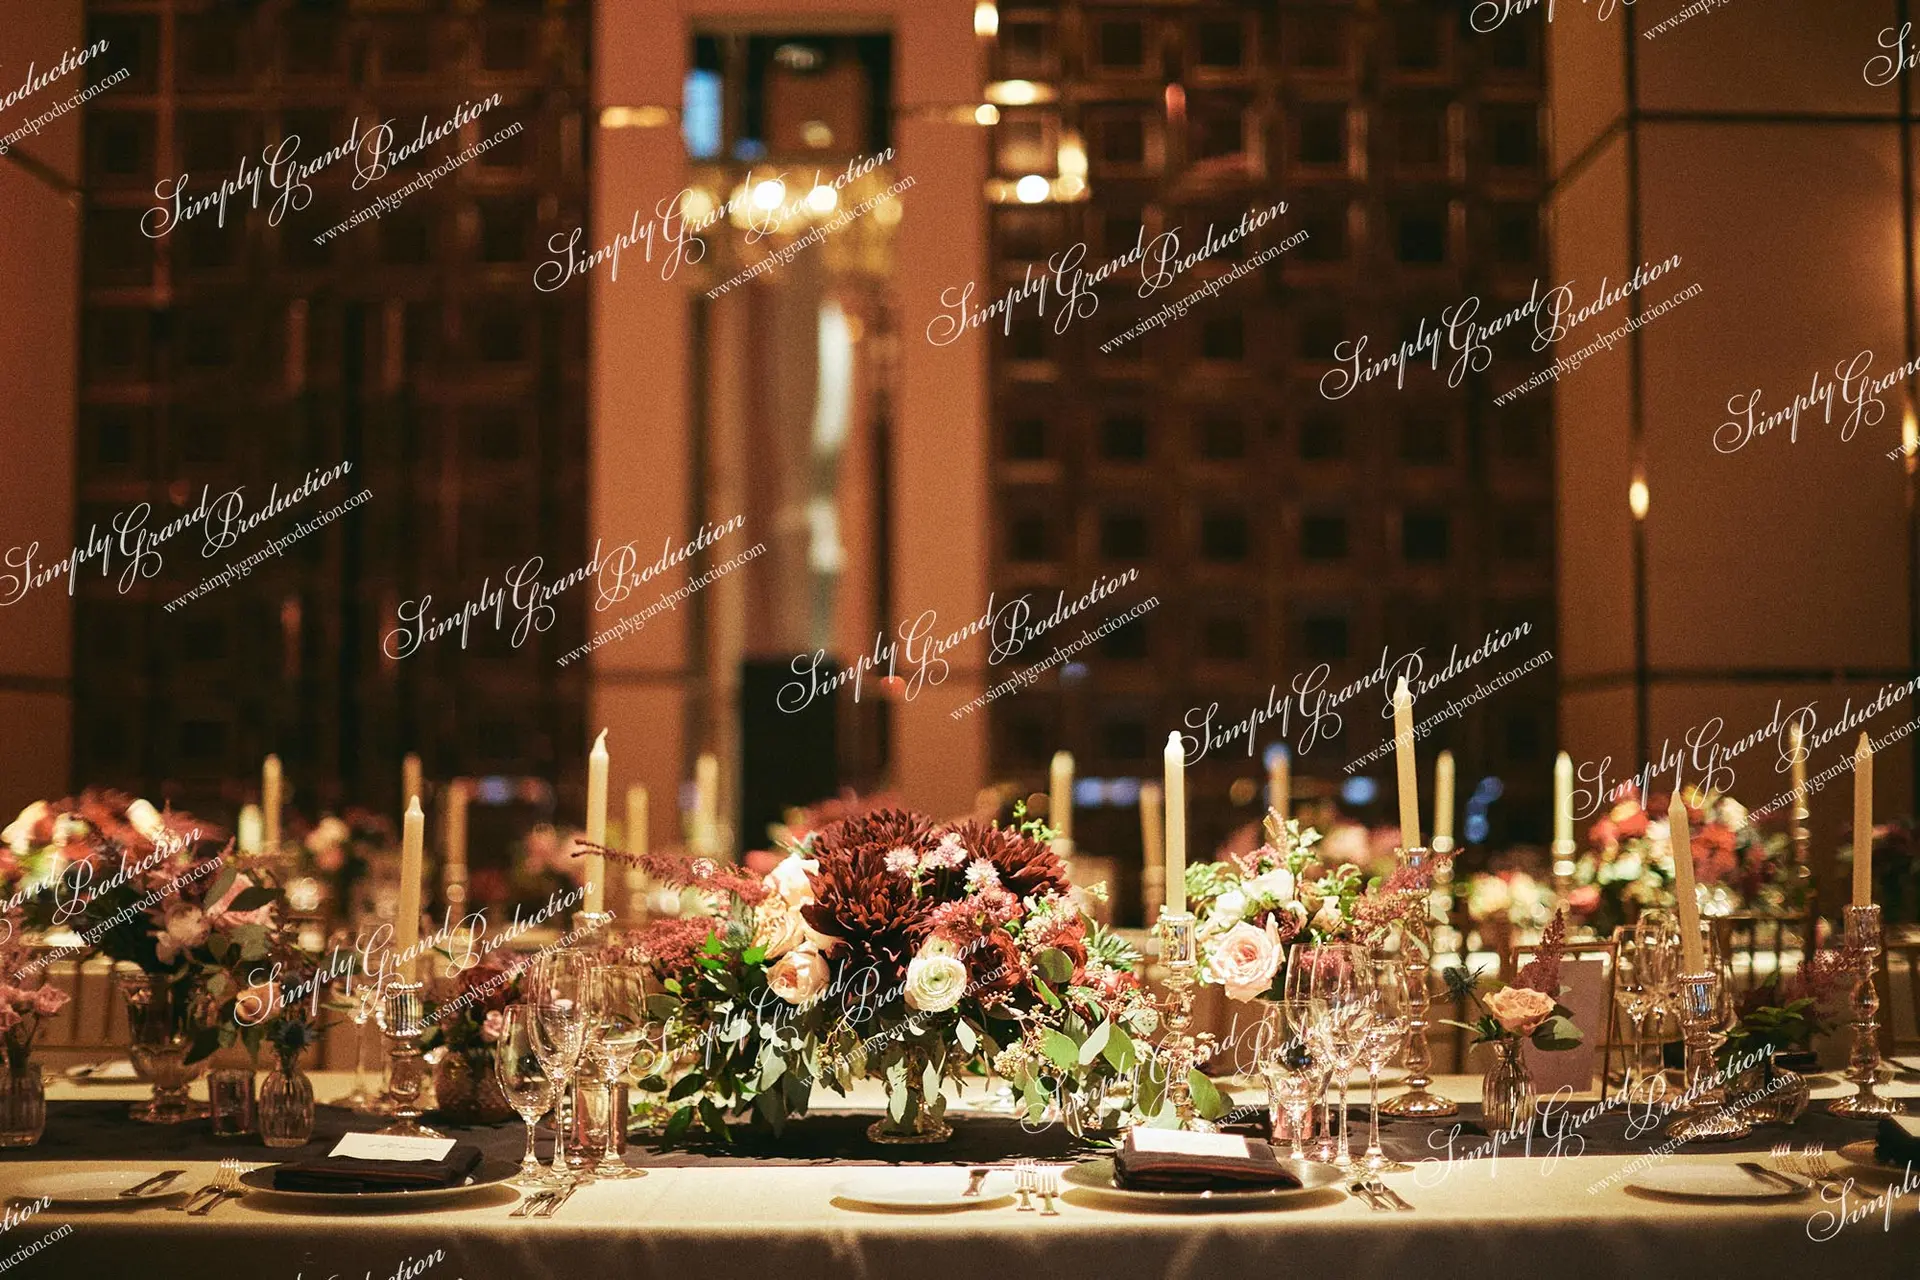 Simply_Grand_Production_Ballroom_wedding_decoration_centerpiece_long_table_candle_classic_cutlery_1_11_wm